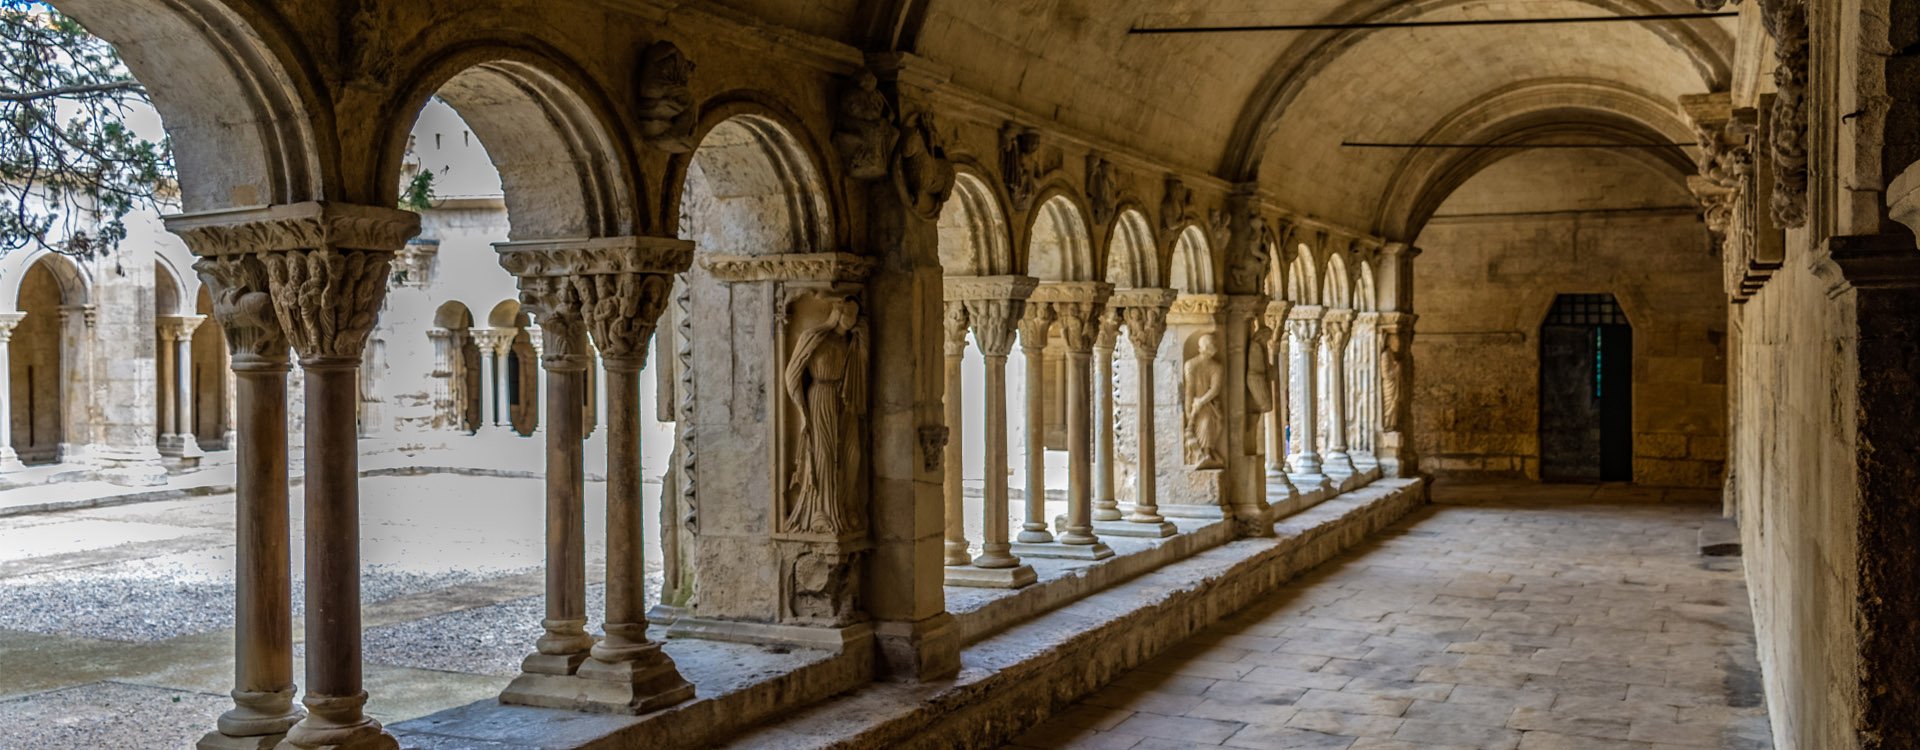 Romanesque Cloisters Church of Saint Trophime Cathedral Arles, Provence, France.